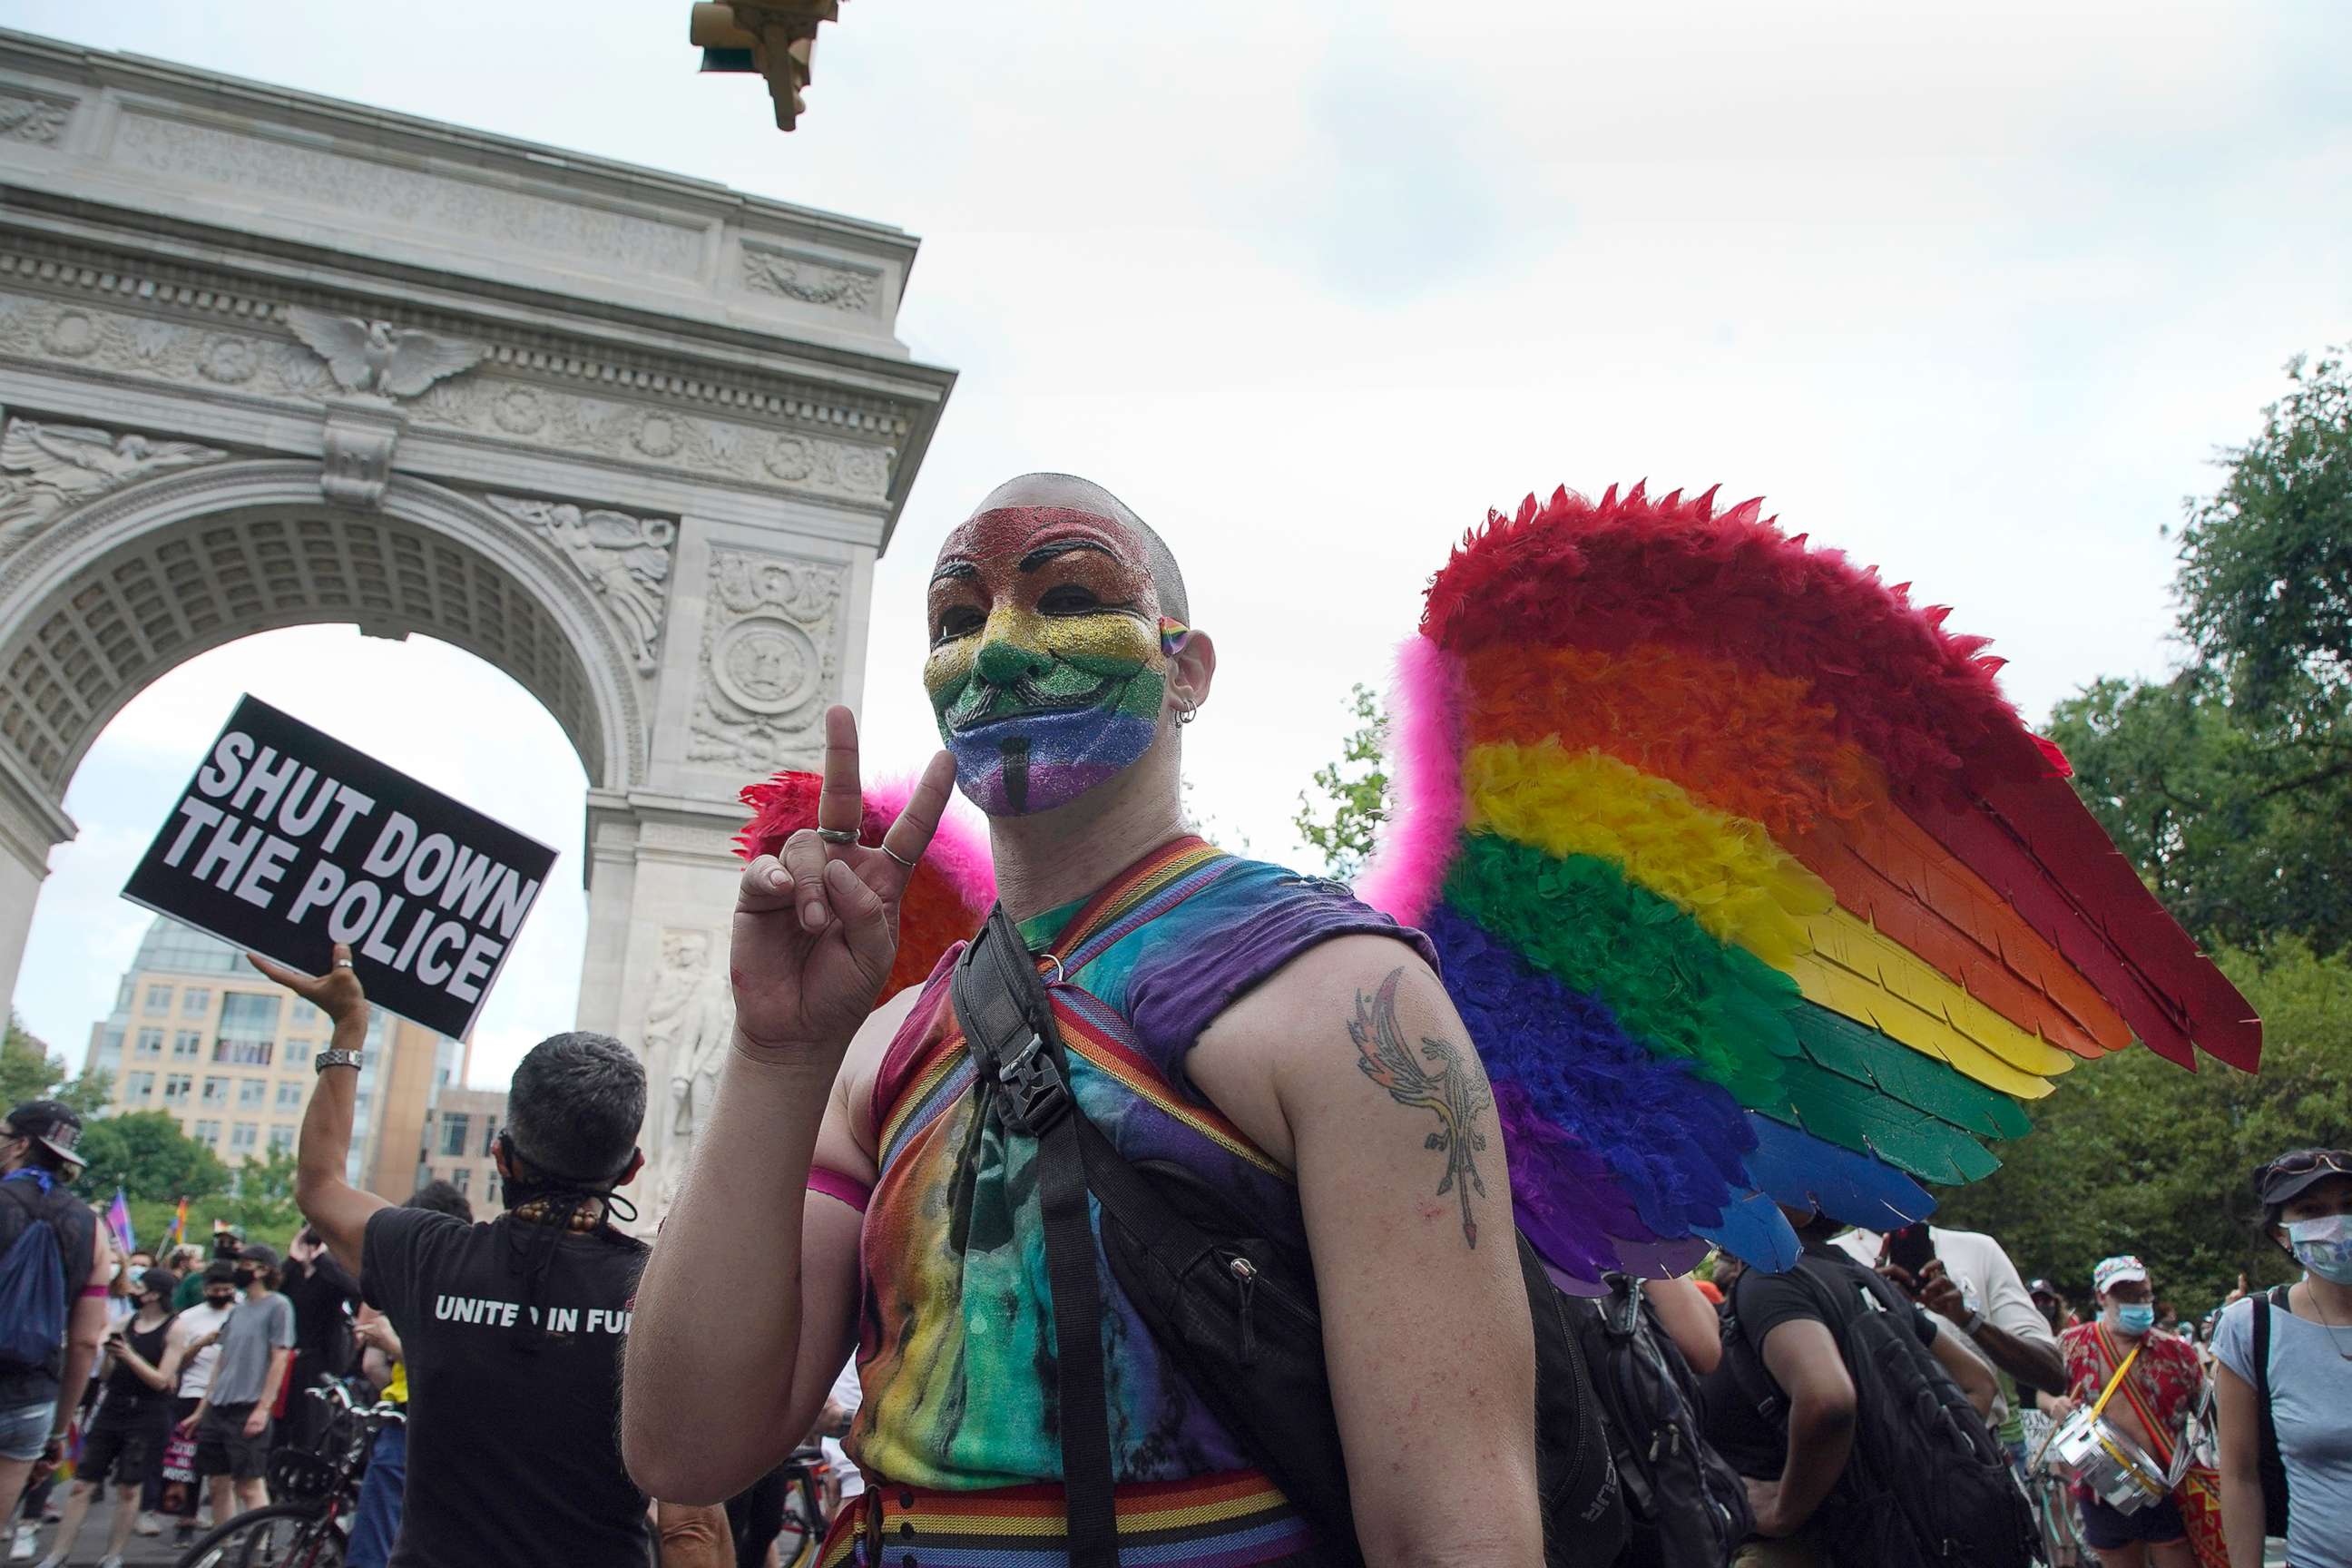 Why the LGBTQ community sidelined police for Pride photo